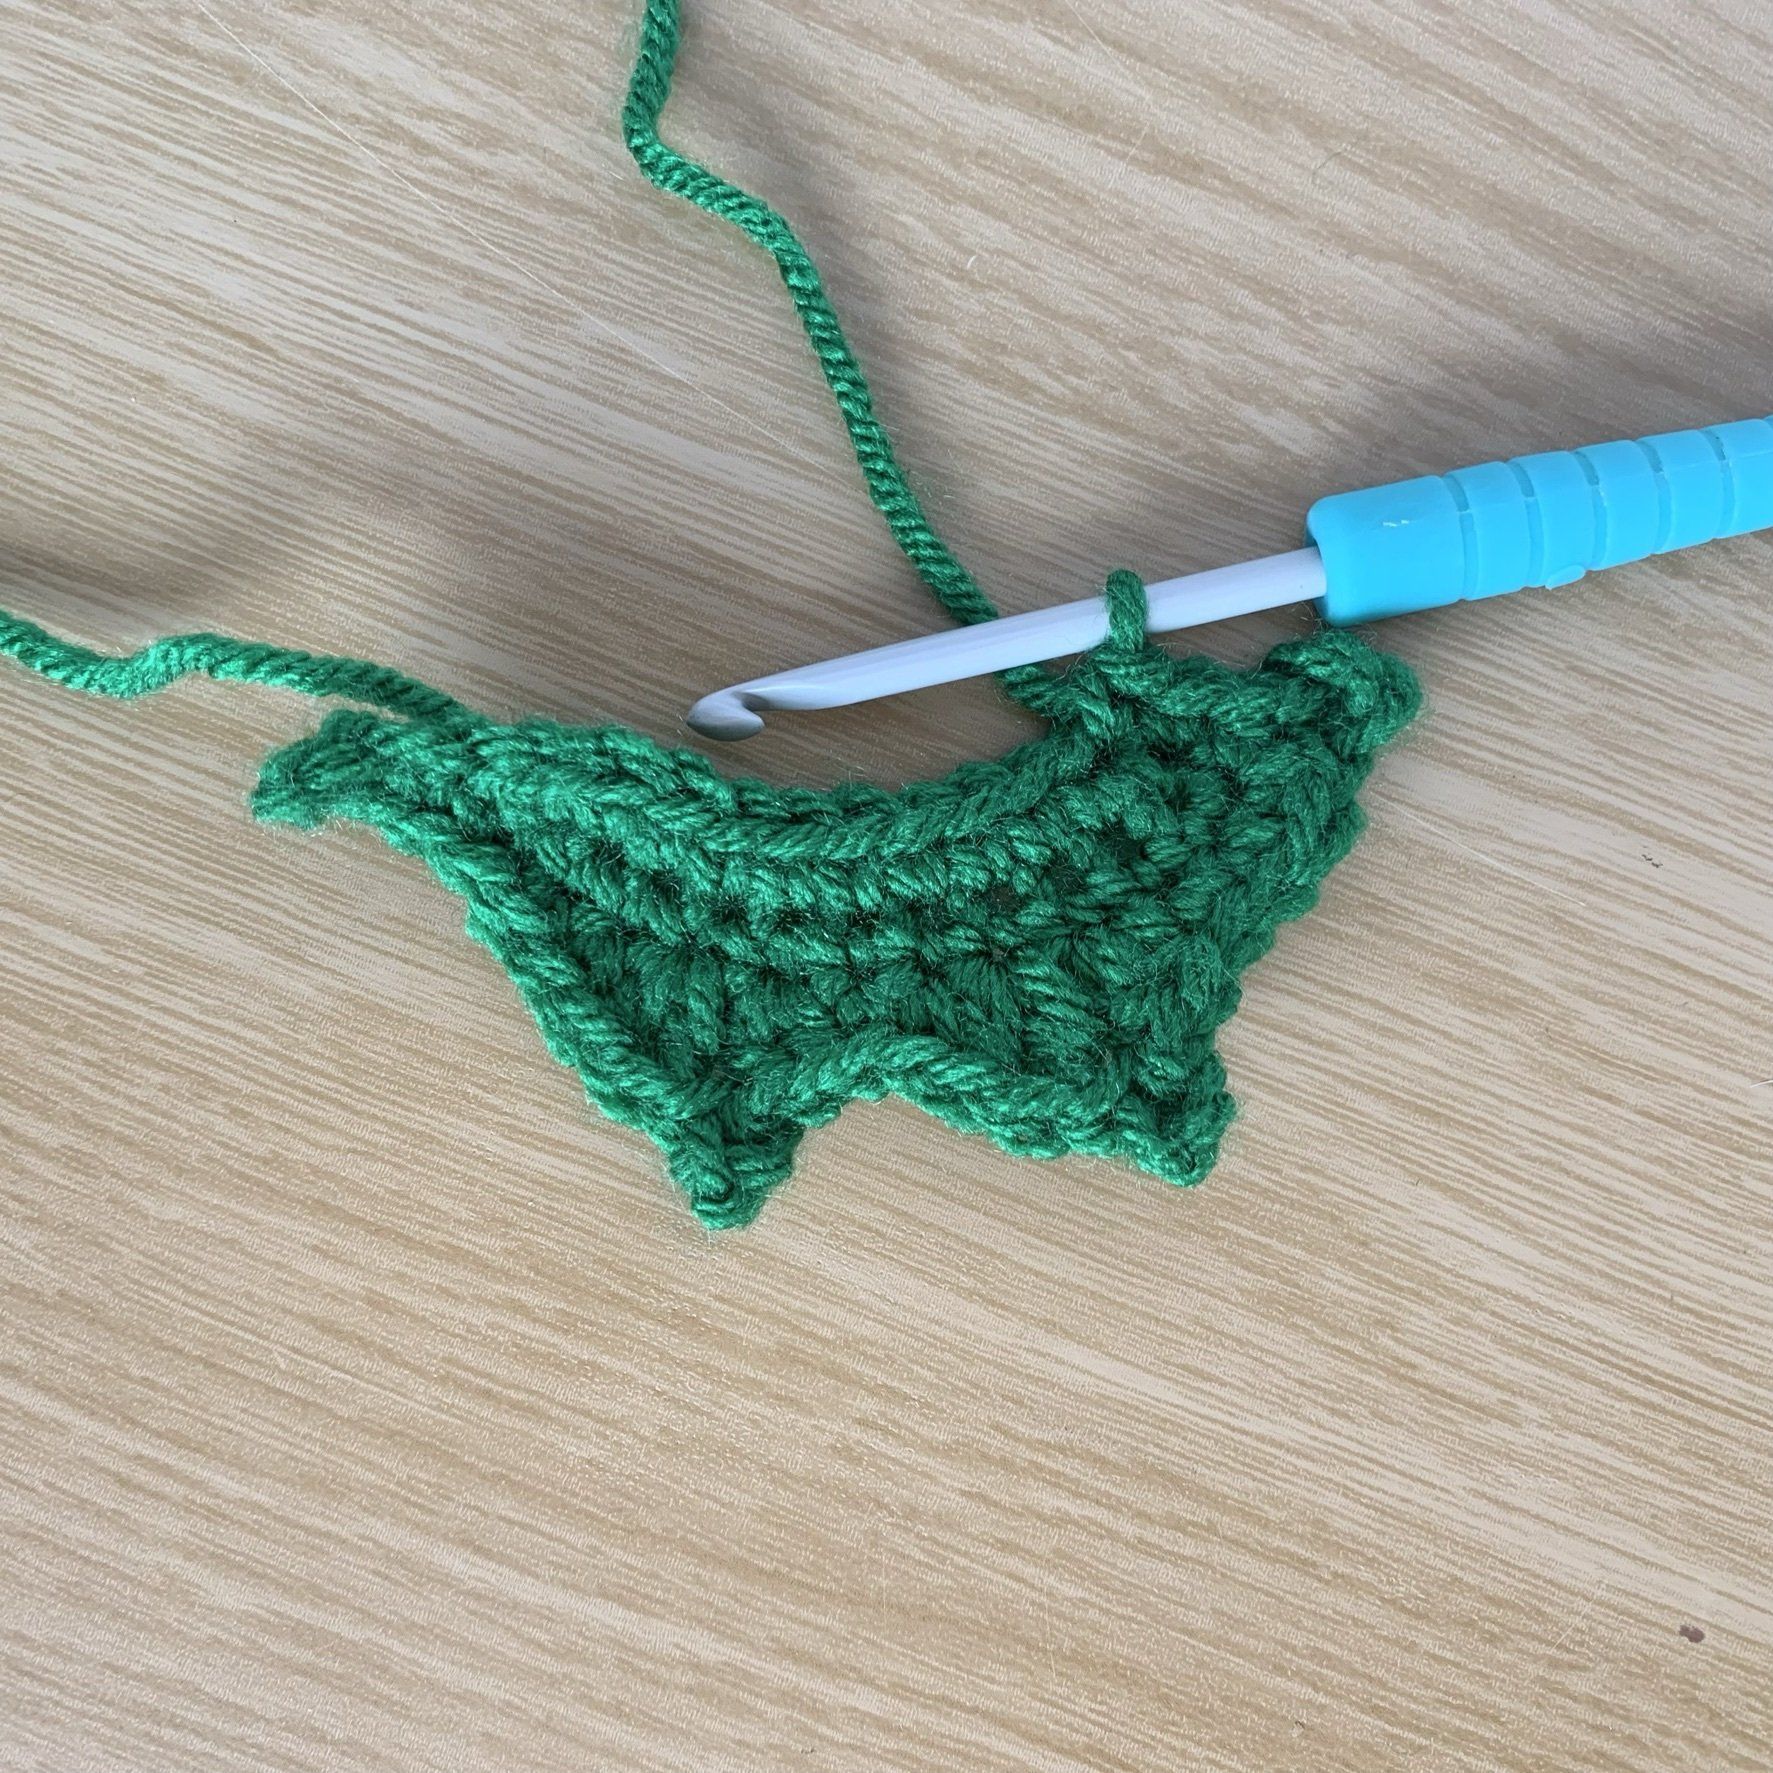 How to crochet a holly leaf